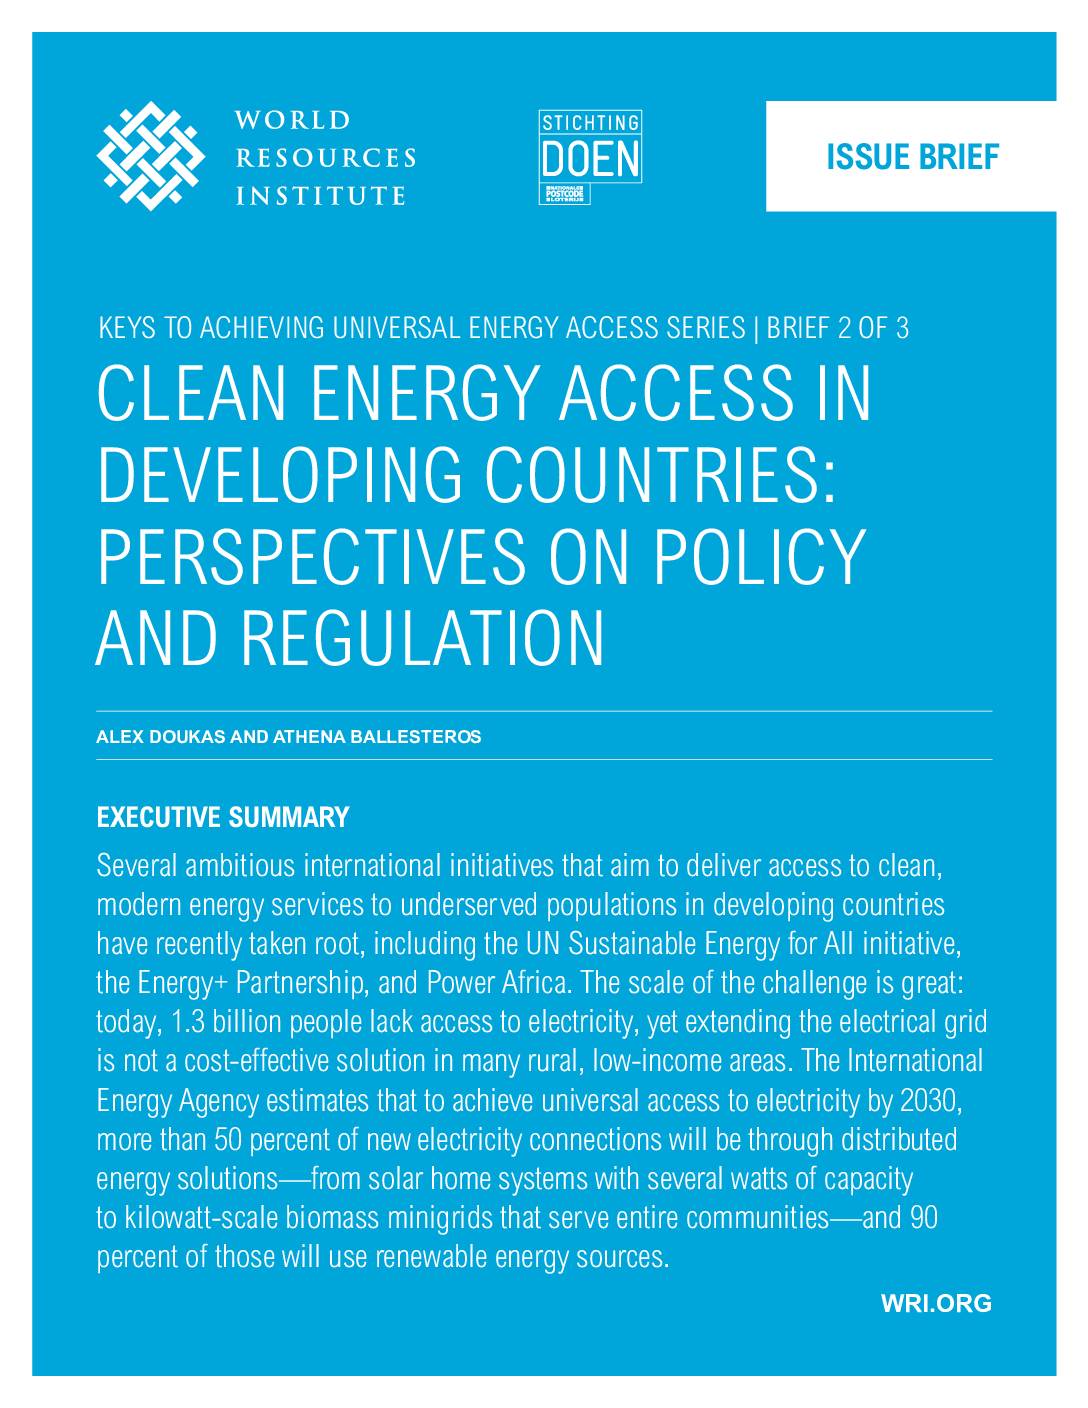 Clean Energy Access in Developing Countries: Perspectives on Policy and Regulation